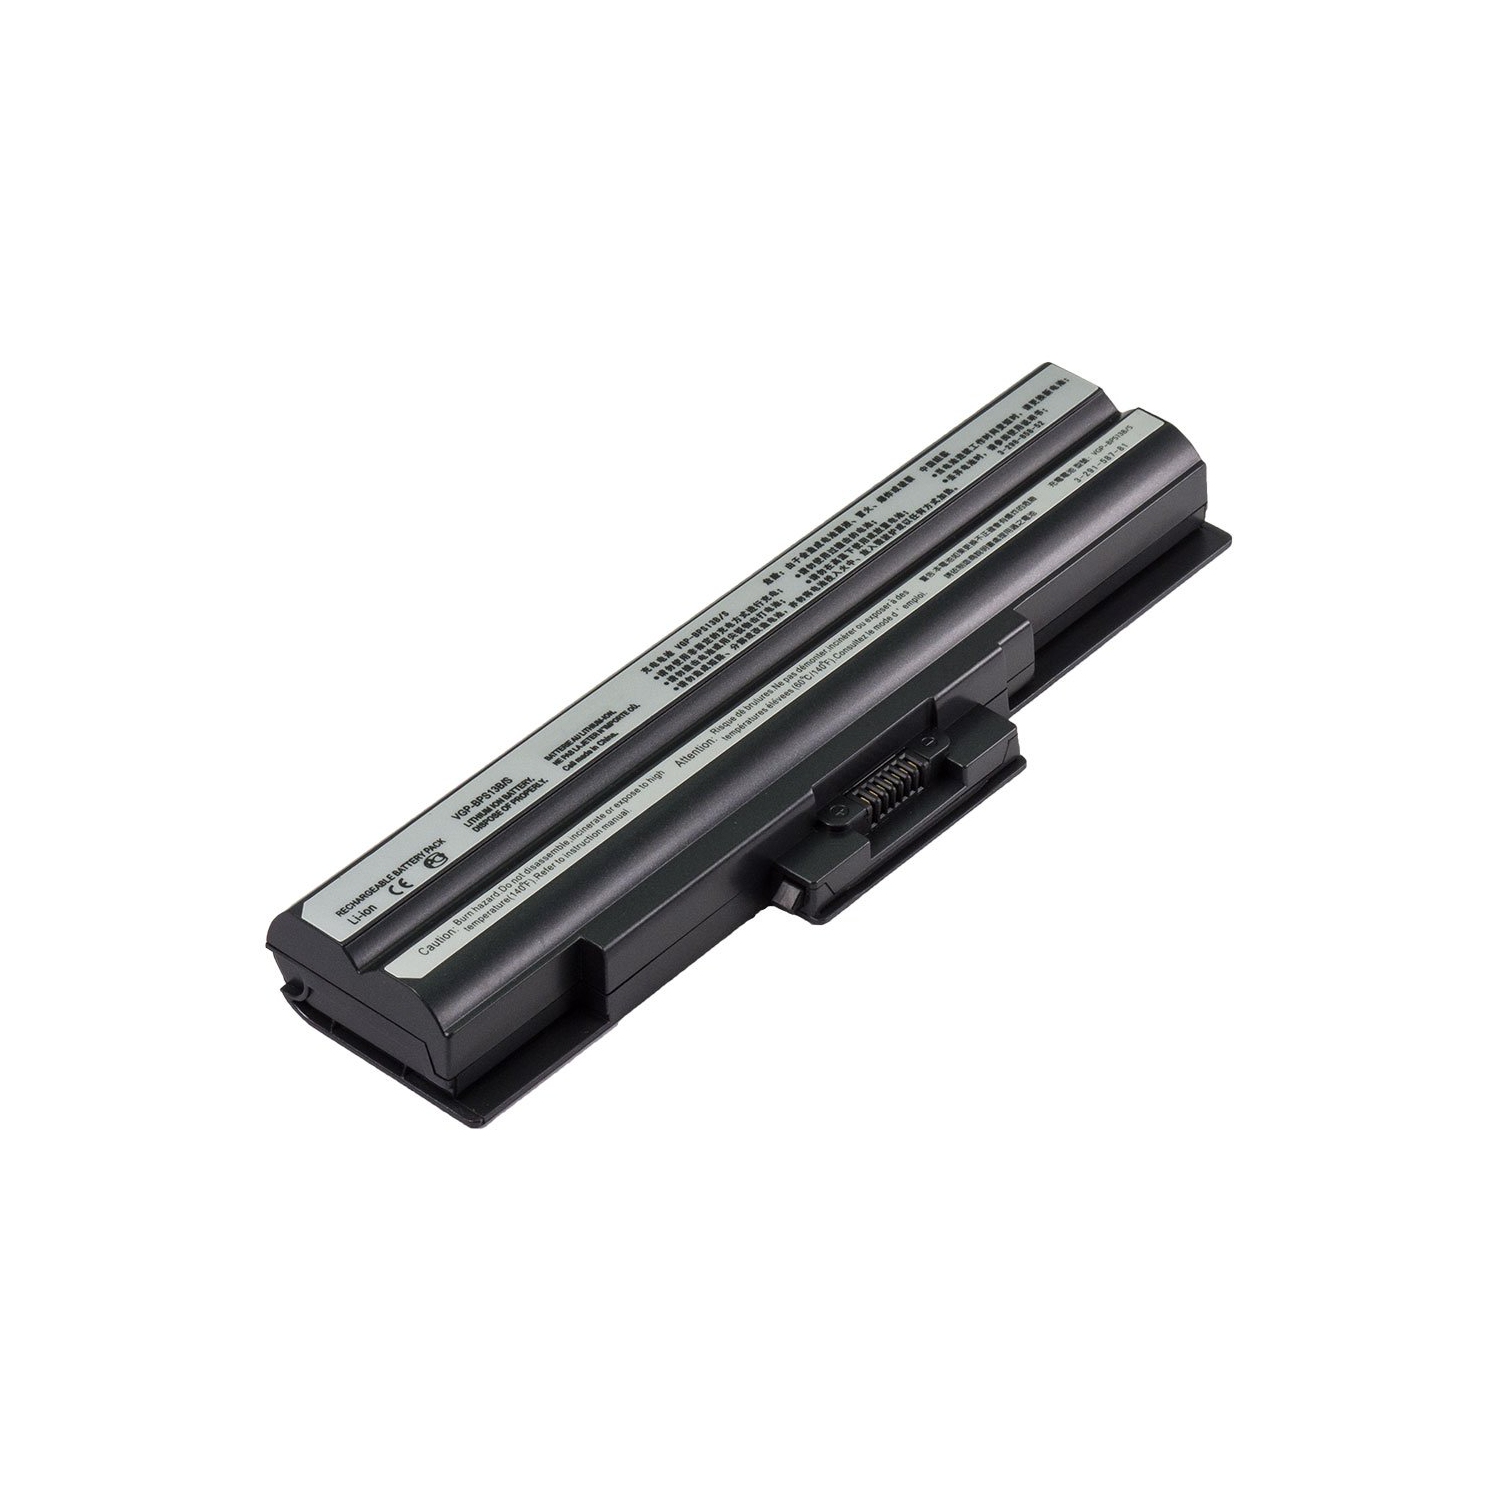 Laptop Battery Replacement for Sony VAIO VGN-AW11XU/Q, VGP-BPL13, VGP-BPS13/Q, VGP-BPS13A/B, VGP-BPS13A/S, VGP-BPS13A